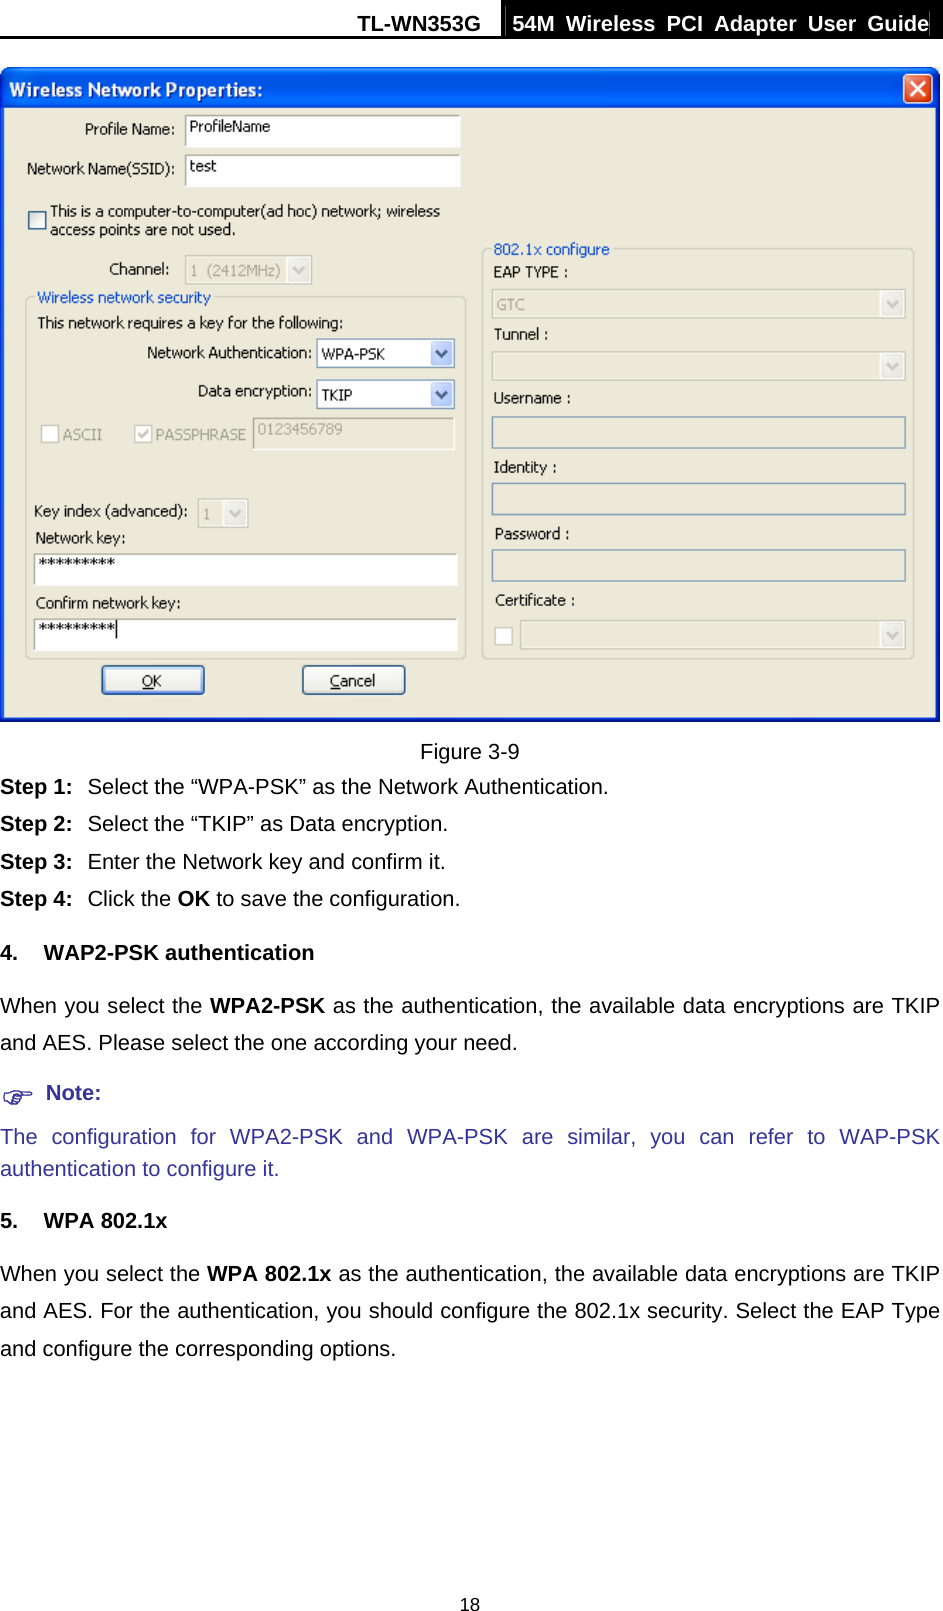 TL-WN353G  54M Wireless PCI Adapter User Guide   18 Figure 3-9 Step 1:  Select the “WPA-PSK” as the Network Authentication. Step 2:  Select the “TKIP” as Data encryption. Step 3:  Enter the Network key and confirm it. Step 4:  Click the OK to save the configuration. 4. WAP2-PSK authentication When you select the WPA2-PSK as the authentication, the available data encryptions are TKIP and AES. Please select the one according your need.   ) Note: The configuration for WPA2-PSK and WPA-PSK are similar, you can refer to WAP-PSK authentication to configure it. 5. WPA 802.1x When you select the WPA 802.1x as the authentication, the available data encryptions are TKIP and AES. For the authentication, you should configure the 802.1x security. Select the EAP Type and configure the corresponding options. 